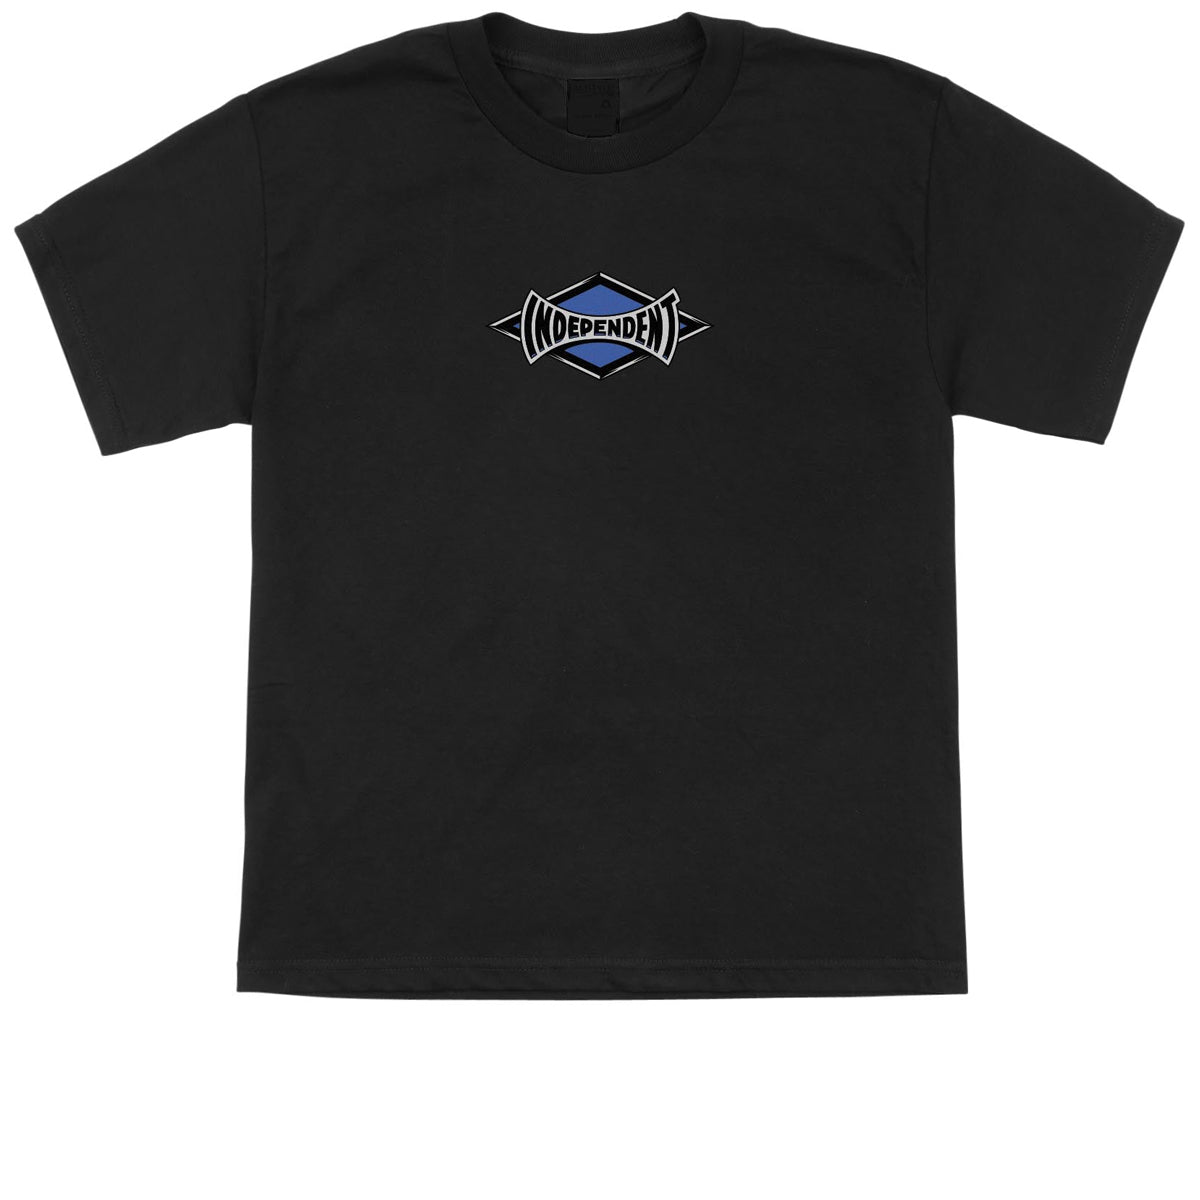 Independent Youth Legacy T-Shirt - Black image 2